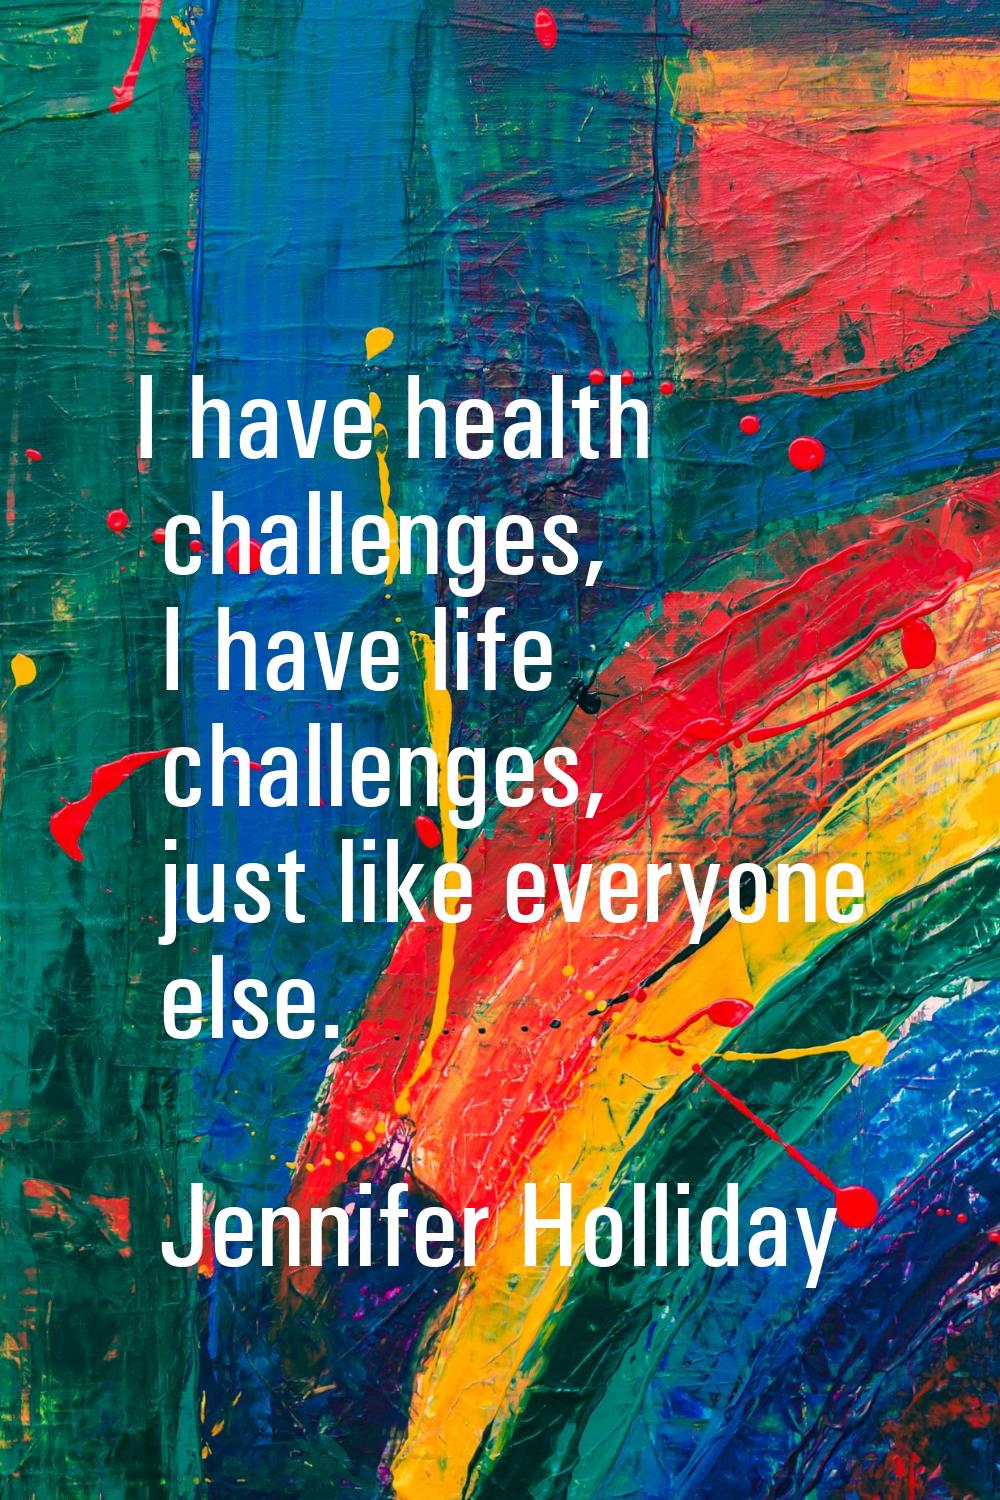 I have health challenges, I have life challenges, just like everyone else.